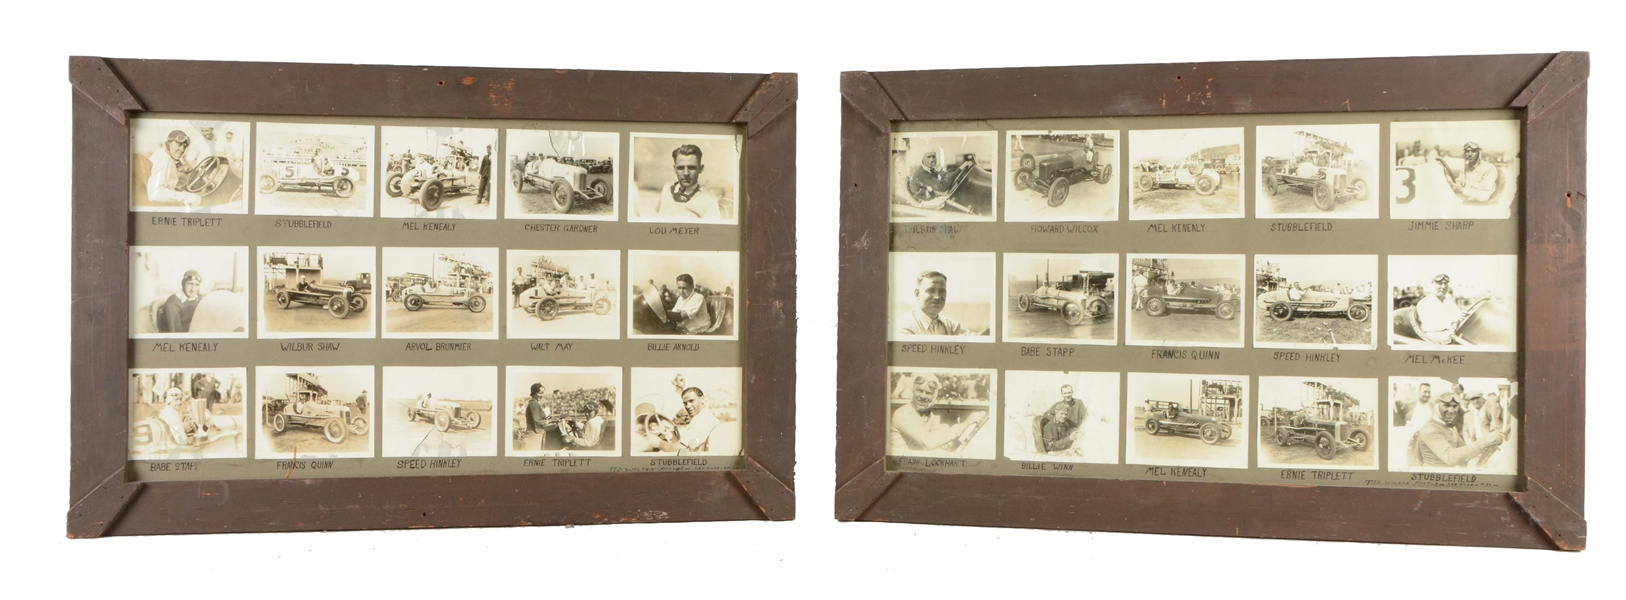 LOT OF 2: FRAMES OF RACE CARS & DRIVERS BY TED WILSON OF SAN JOSE, CALIFORNIA.